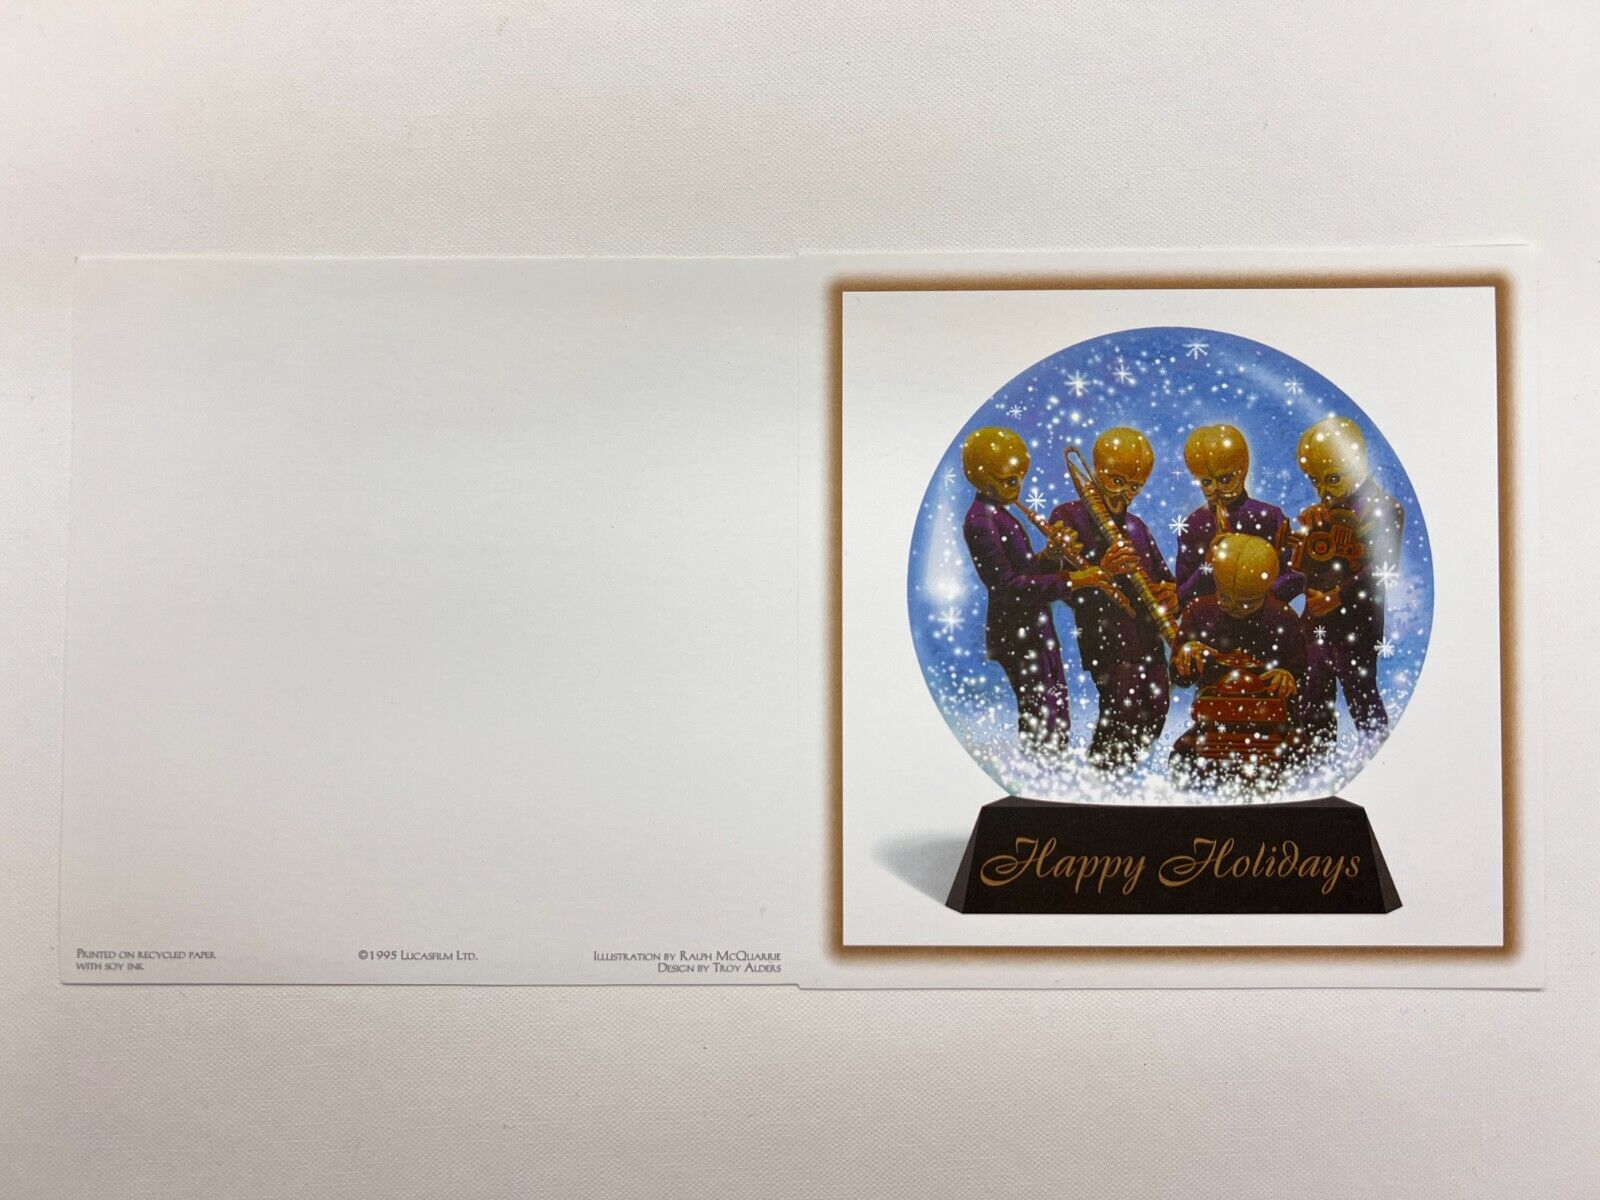 LUCASFILM HOLIDAY CHRISTMAS CARD 1995 VINTAGE STAR WARS EMPLOYEE RALPH MCQUARRIE